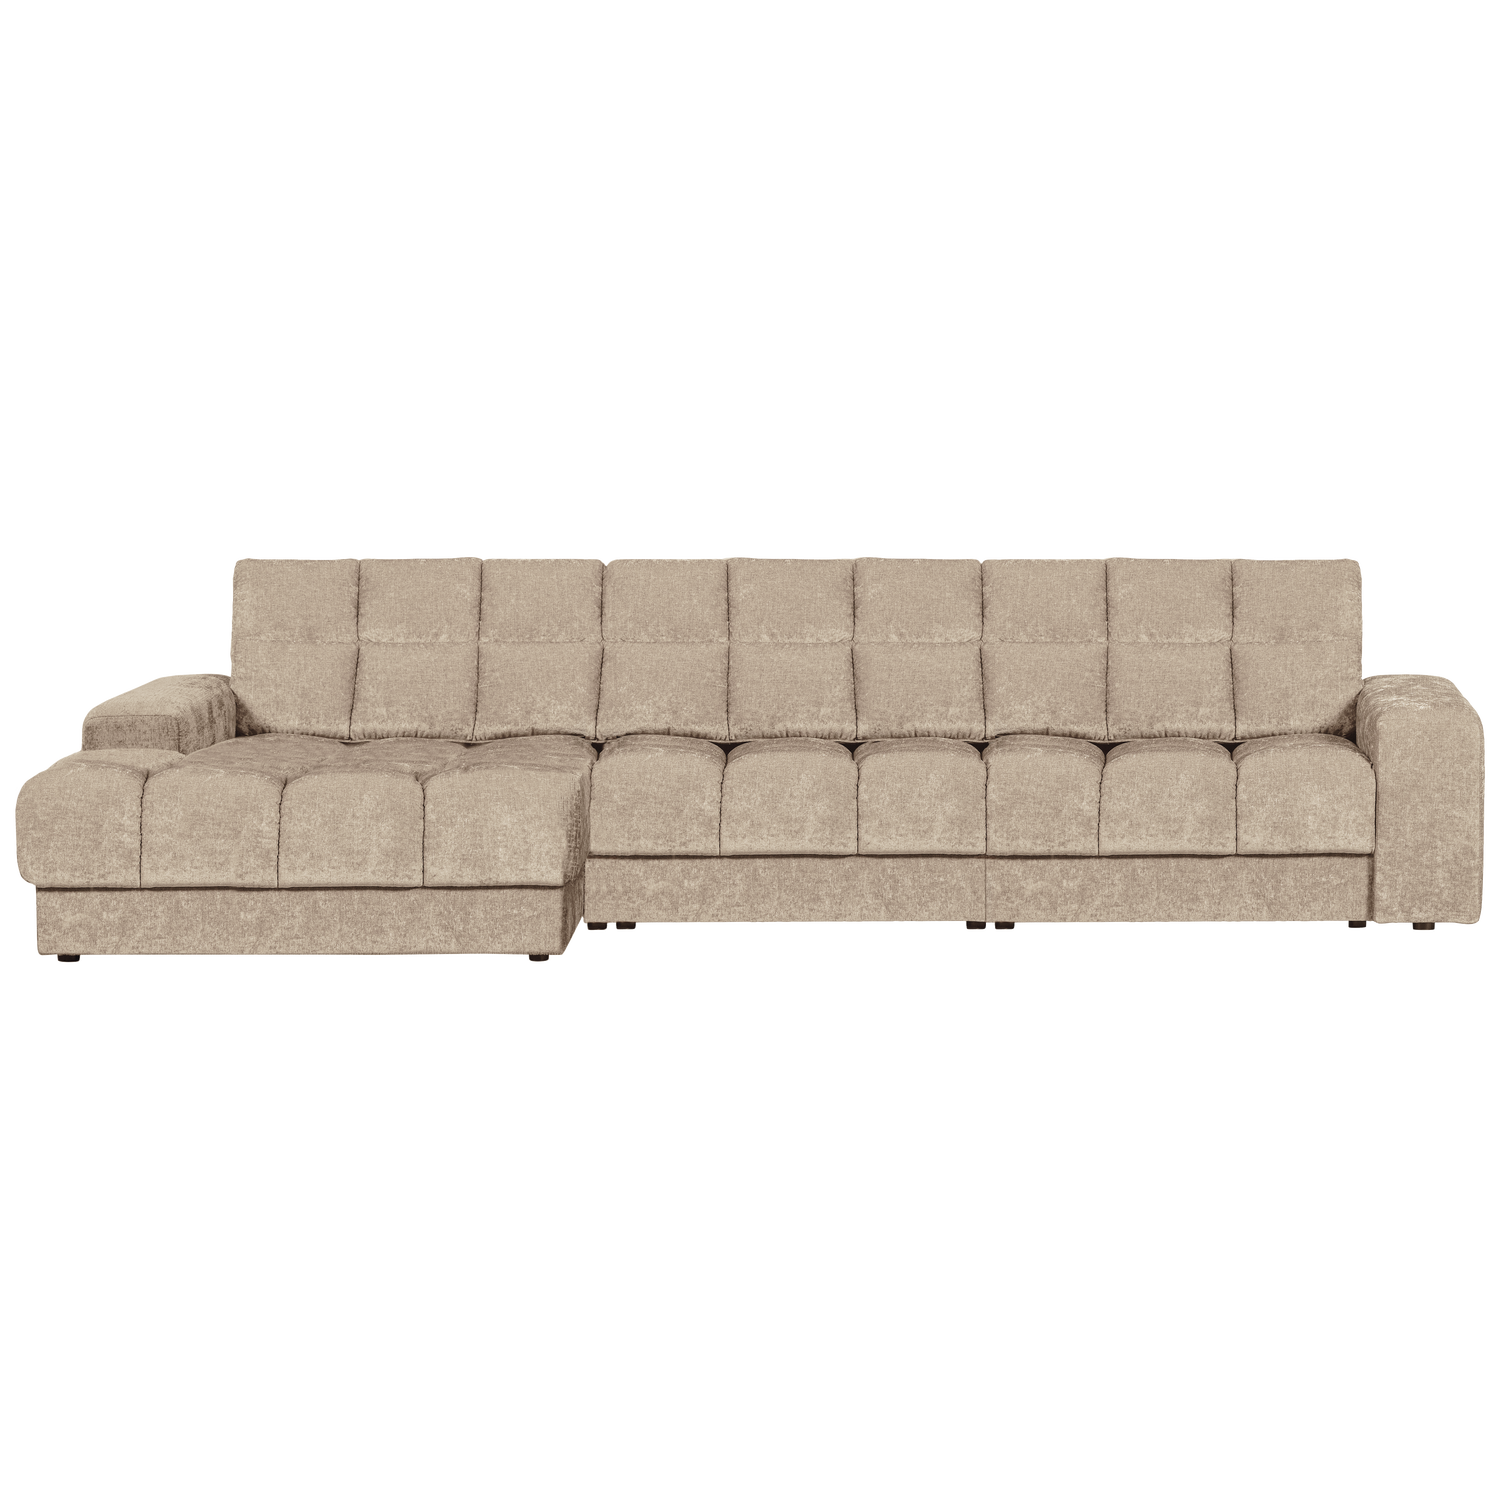 WOOOD Second date chaise longue links vintage nougat Taupe|Bruin Bank